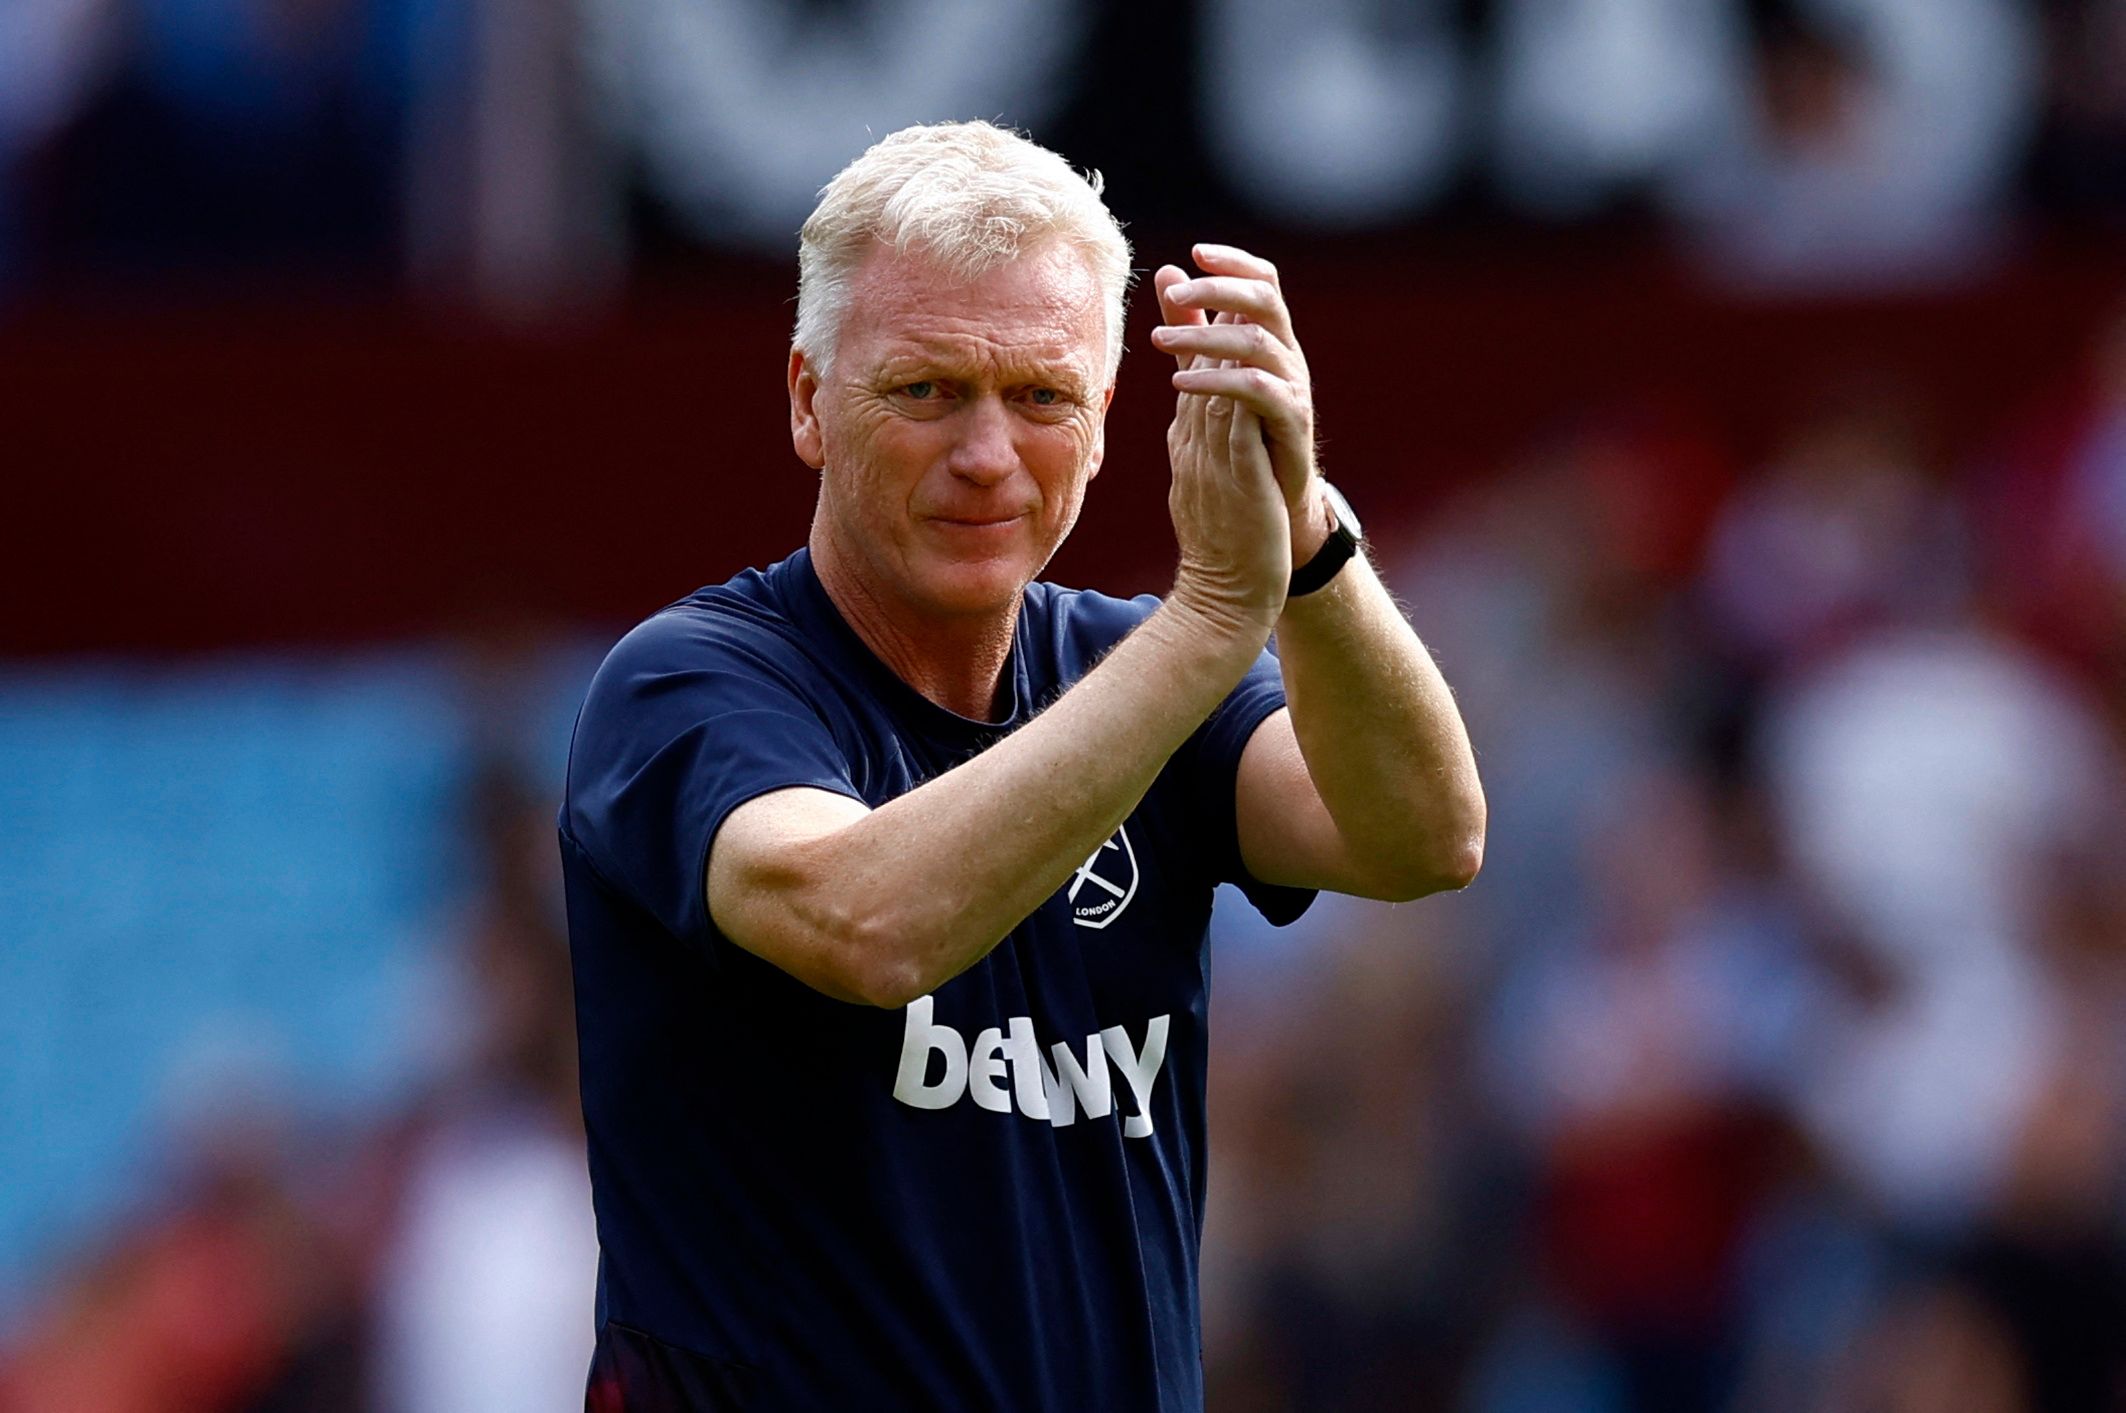 West Ham: GSBK have ‘decision to make’ over Moyes’ future -Follow up